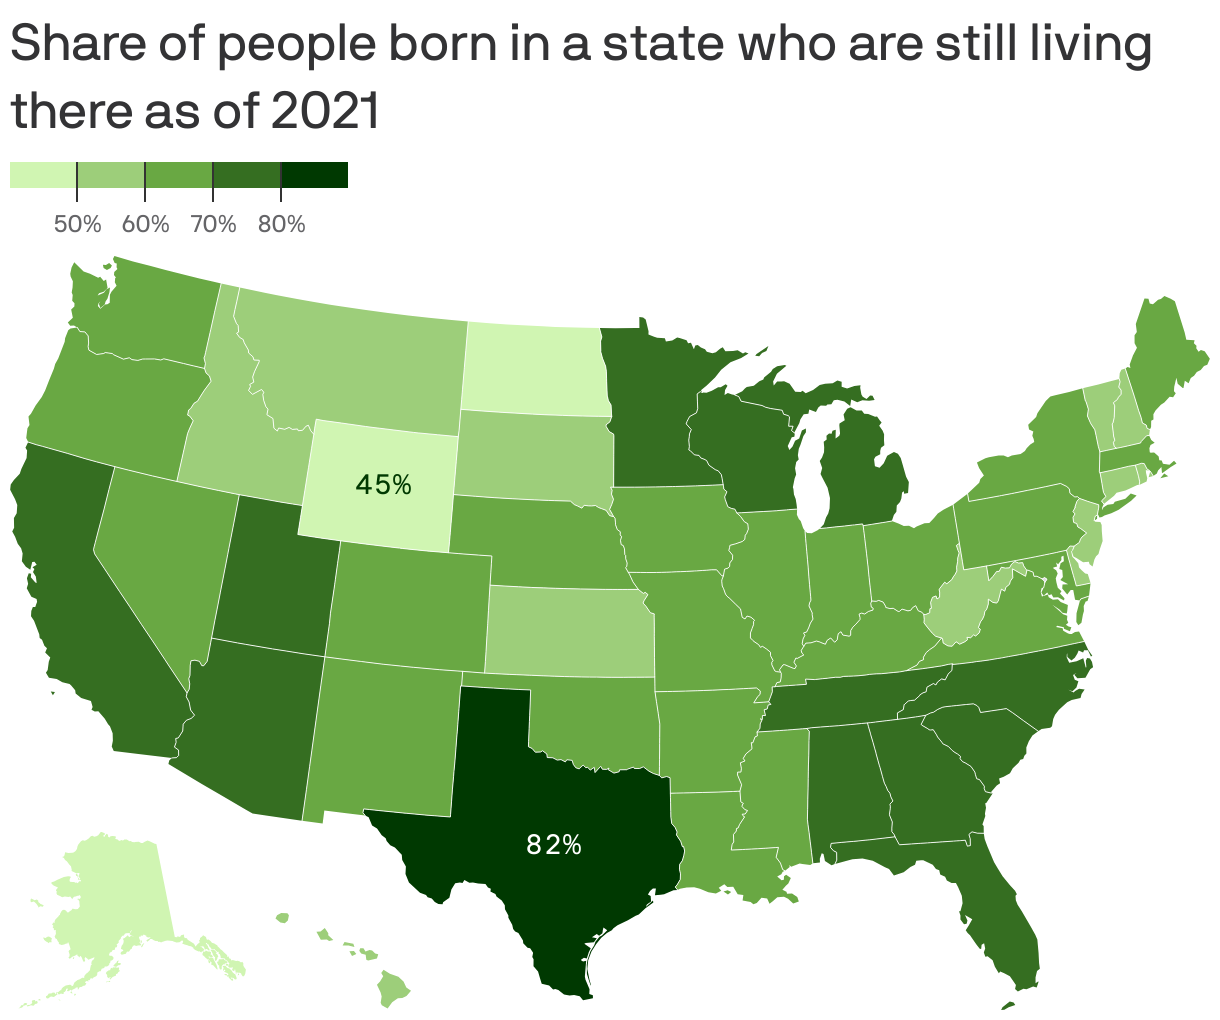 Share of people born in a state who are still living there as of 2021